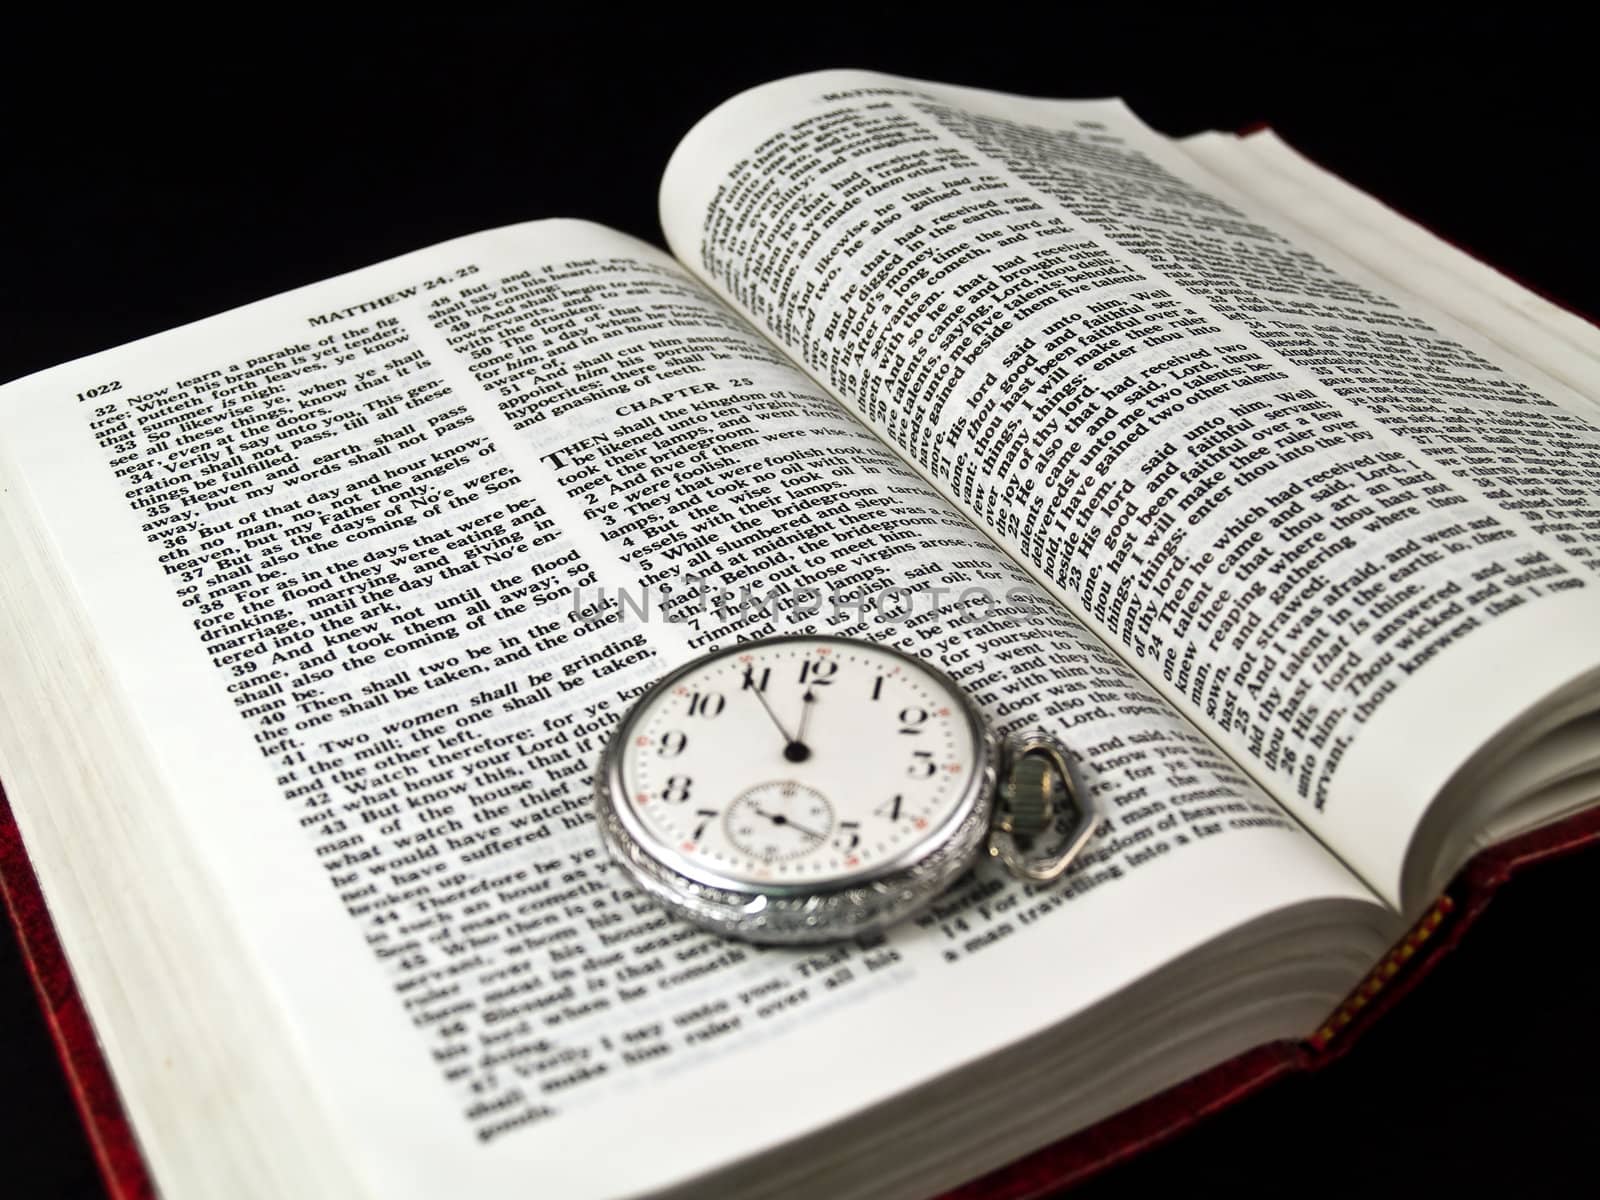 The Bible opened to Matthew 24: 36 with a Pocketwatch - warm color tone  "No man knows the day or hour"